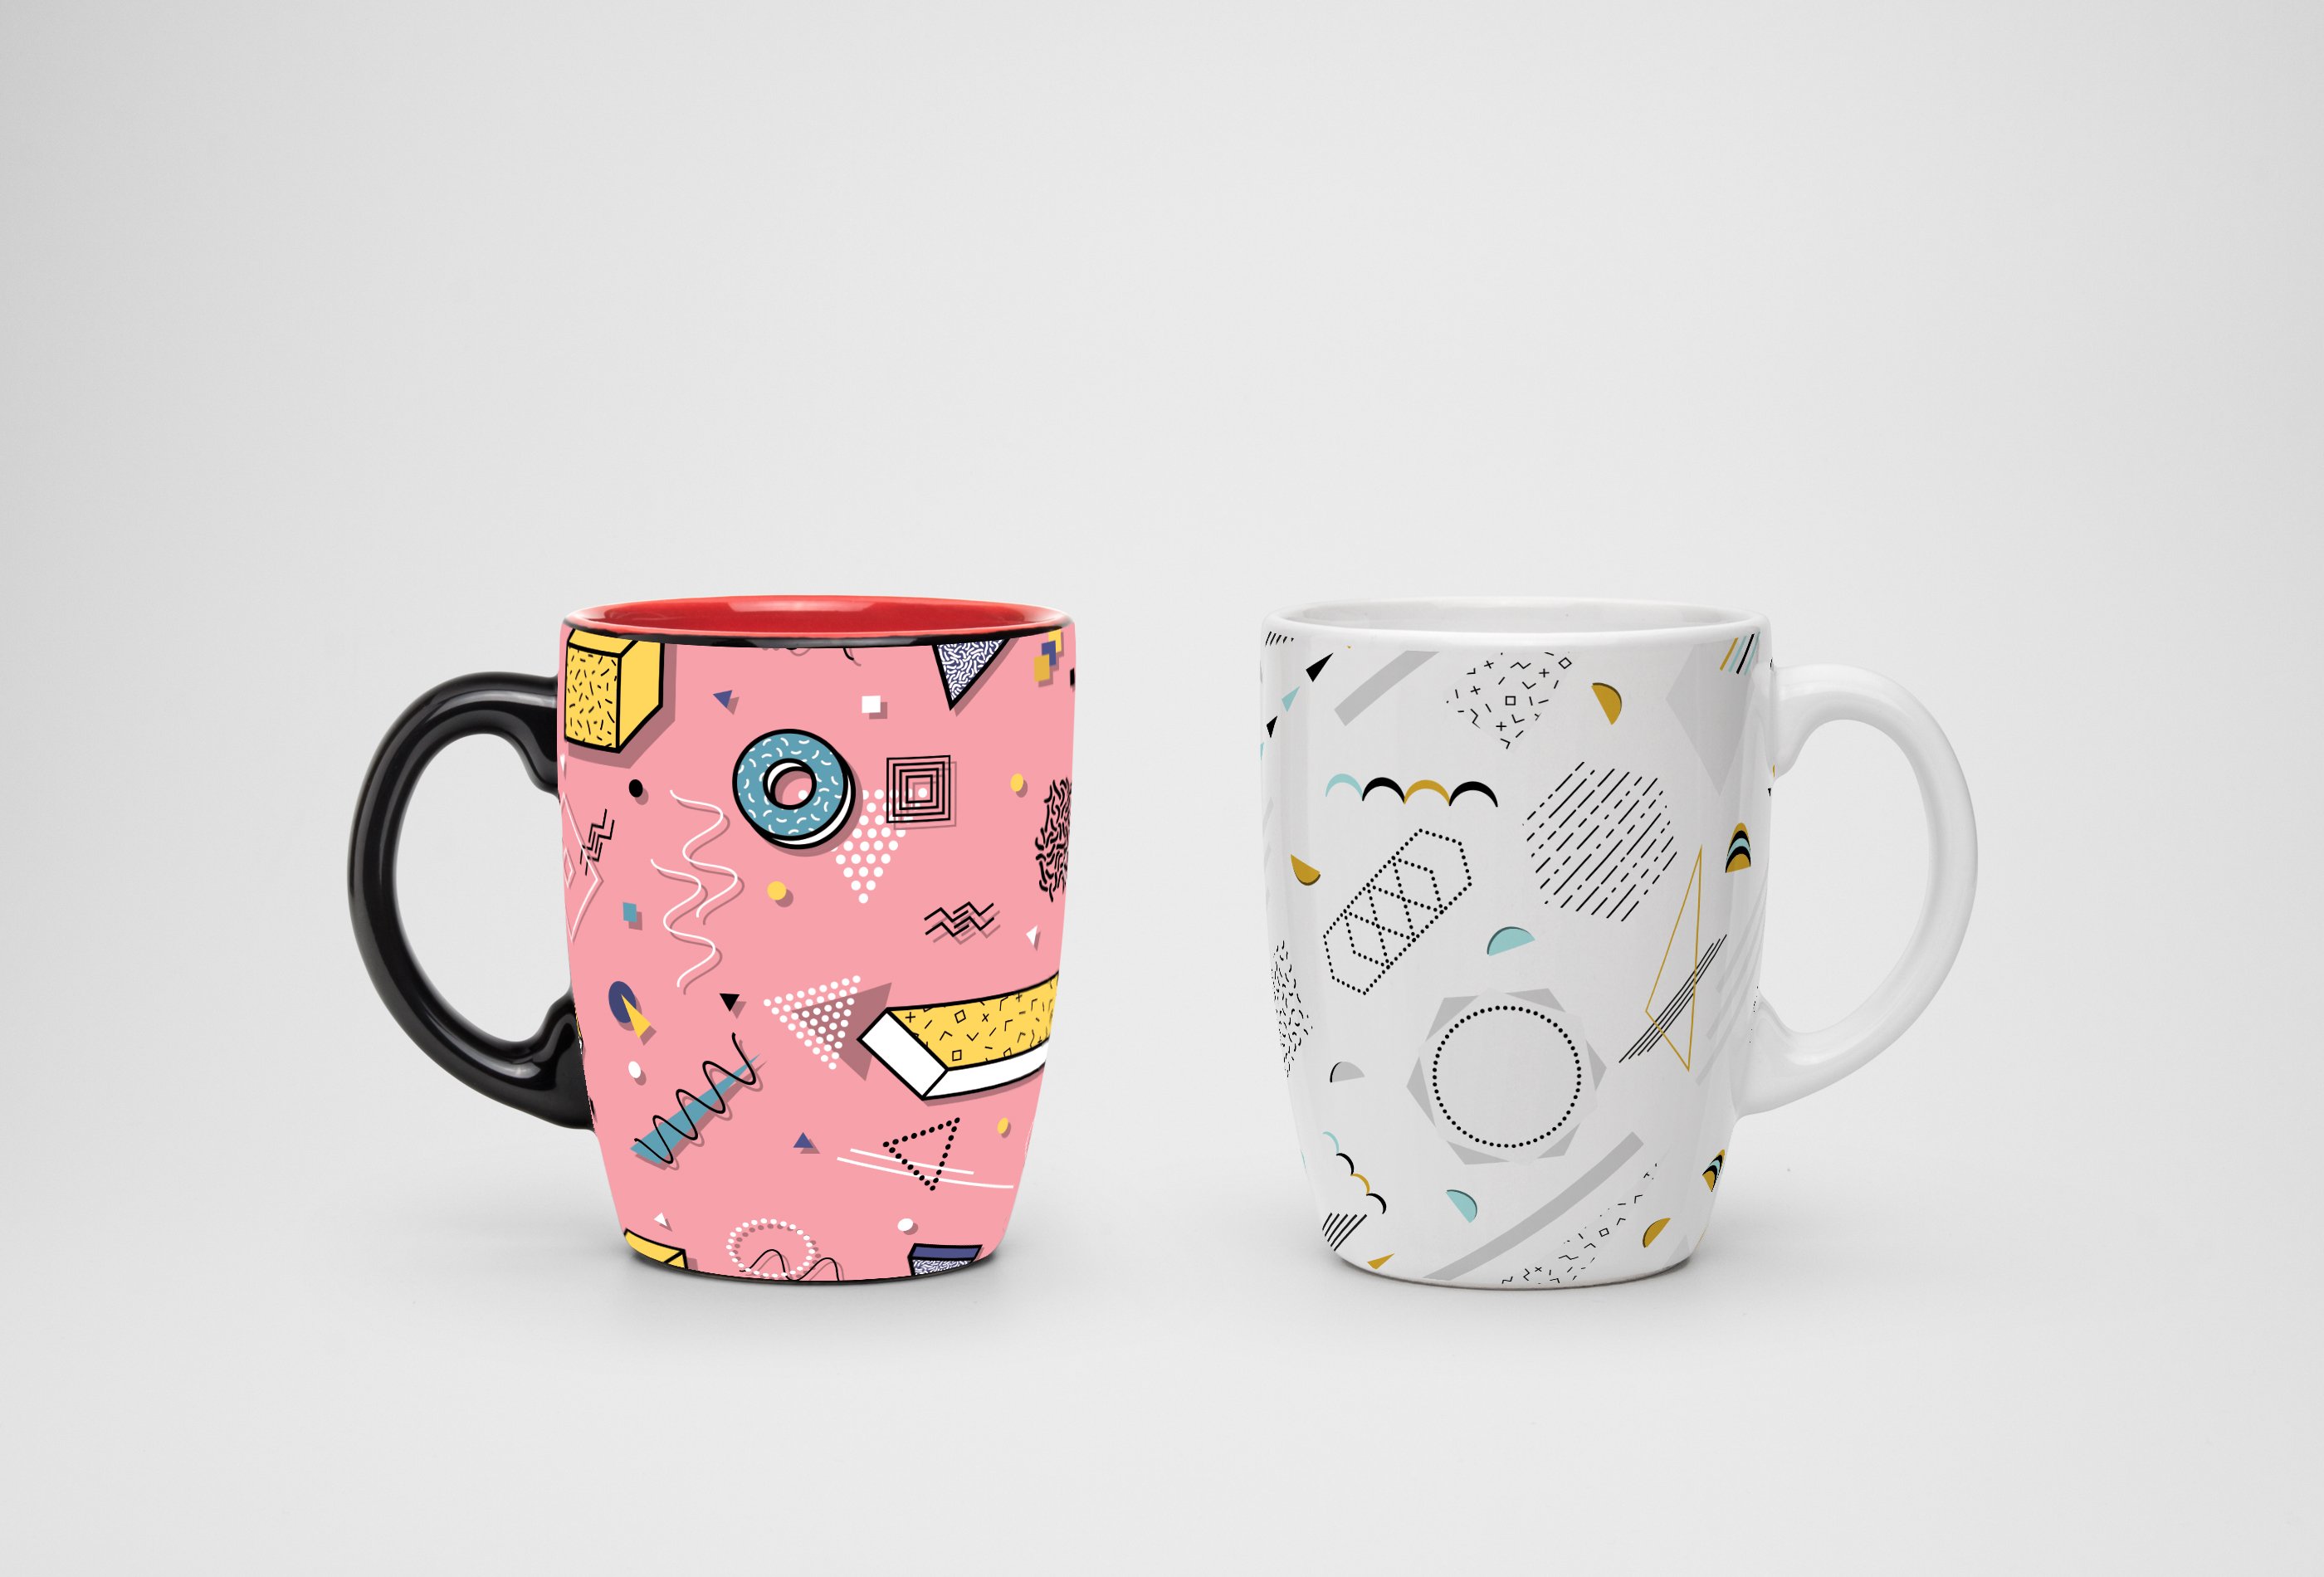 Two modern and hipster cups.